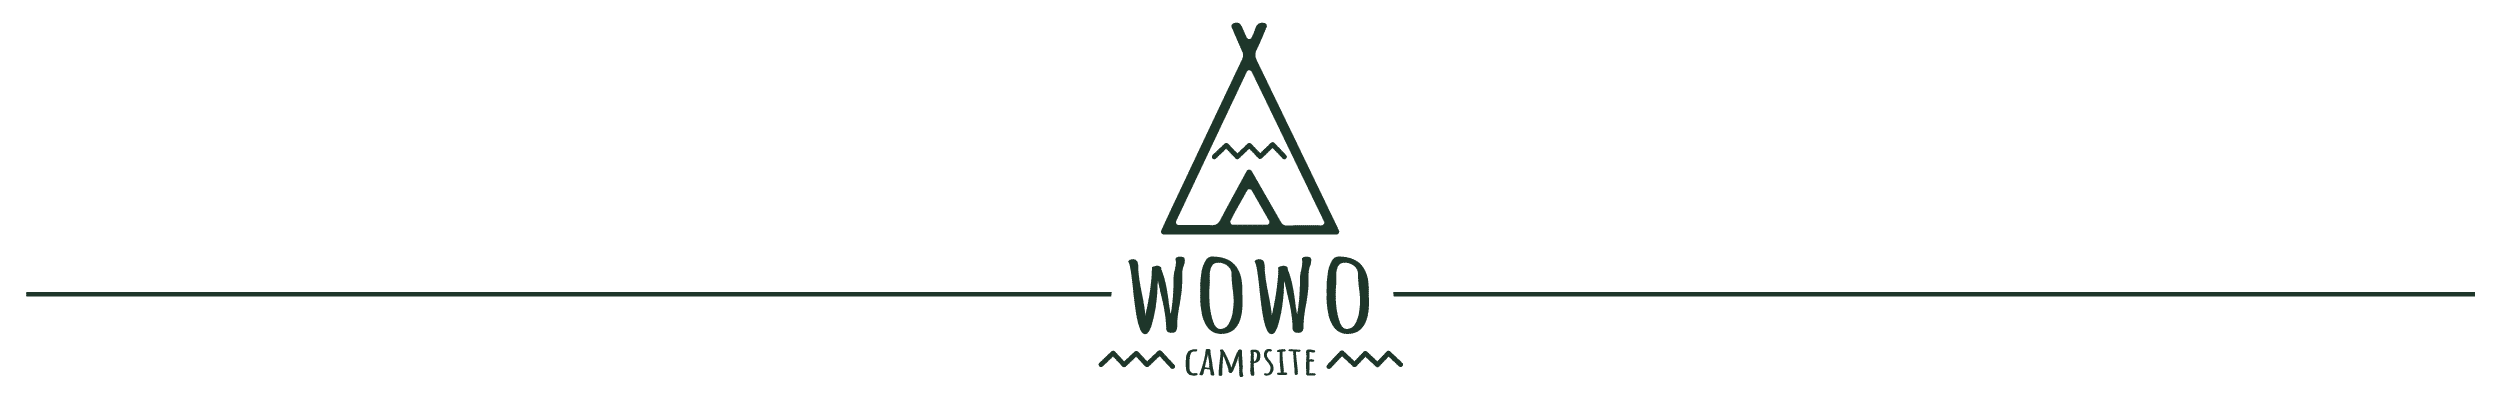 Wowo campsite east sussex camping and glamping